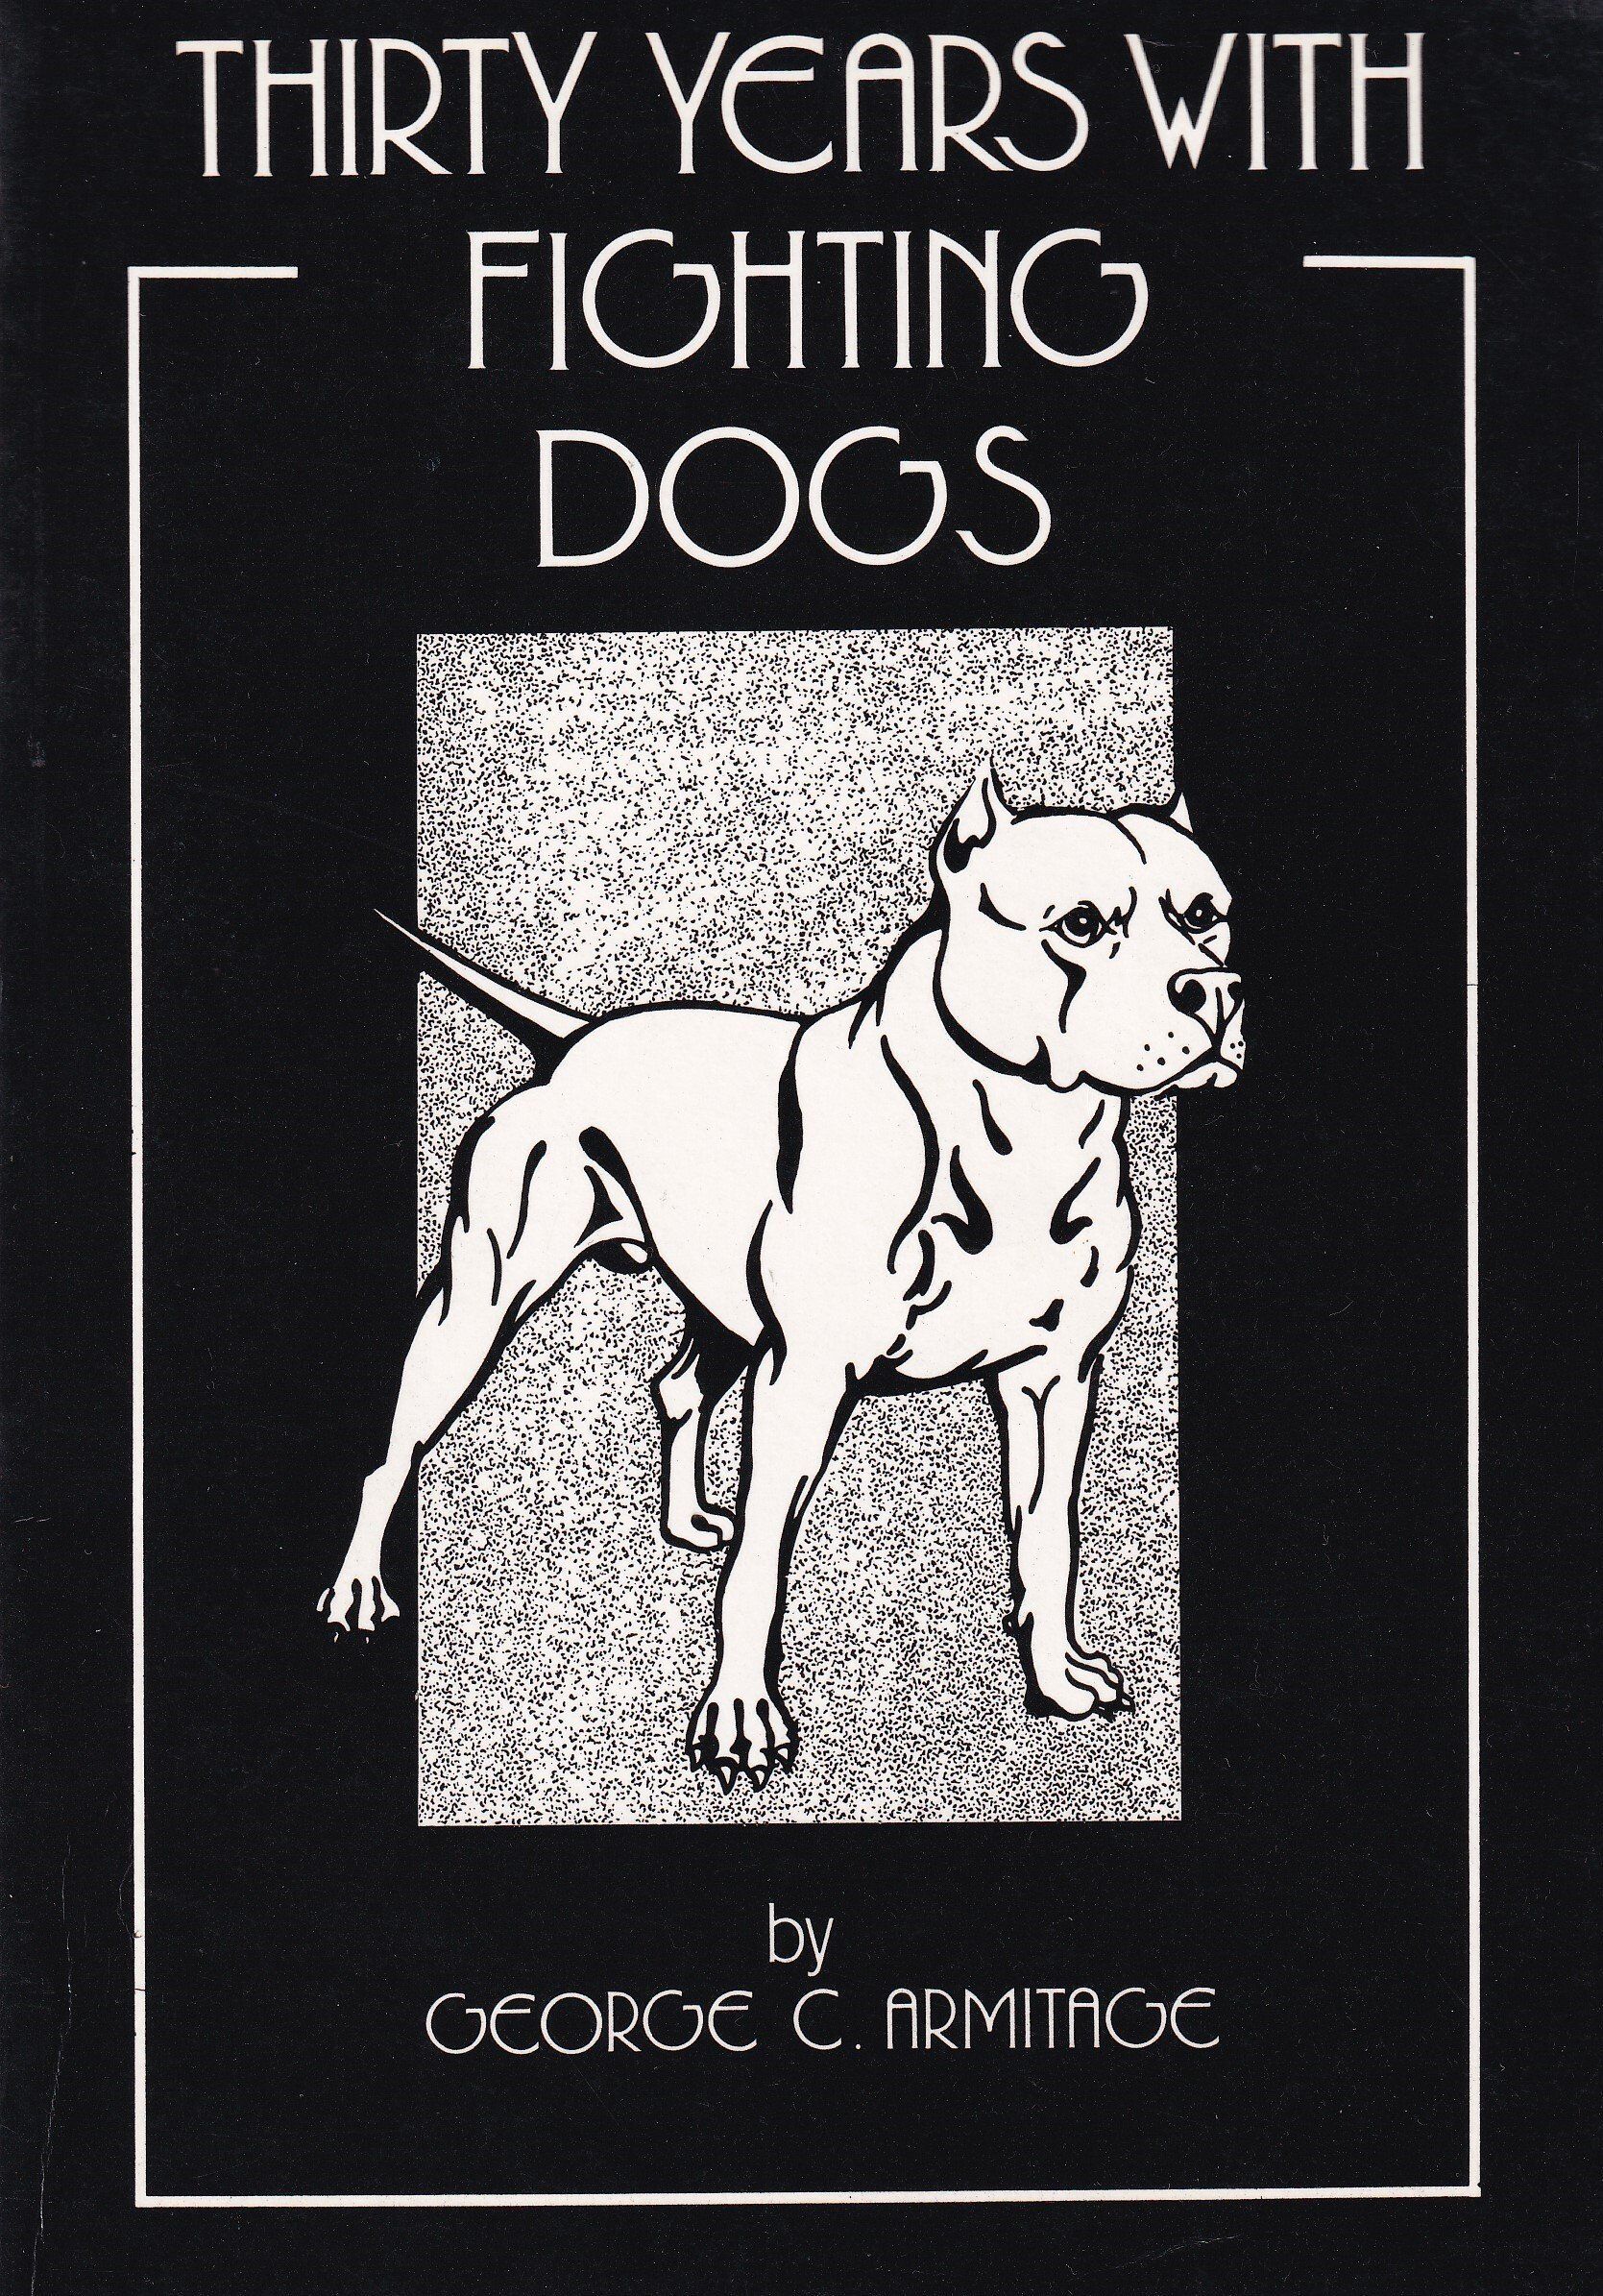 Thirty Years With Fighting Dogs by George C Armitage